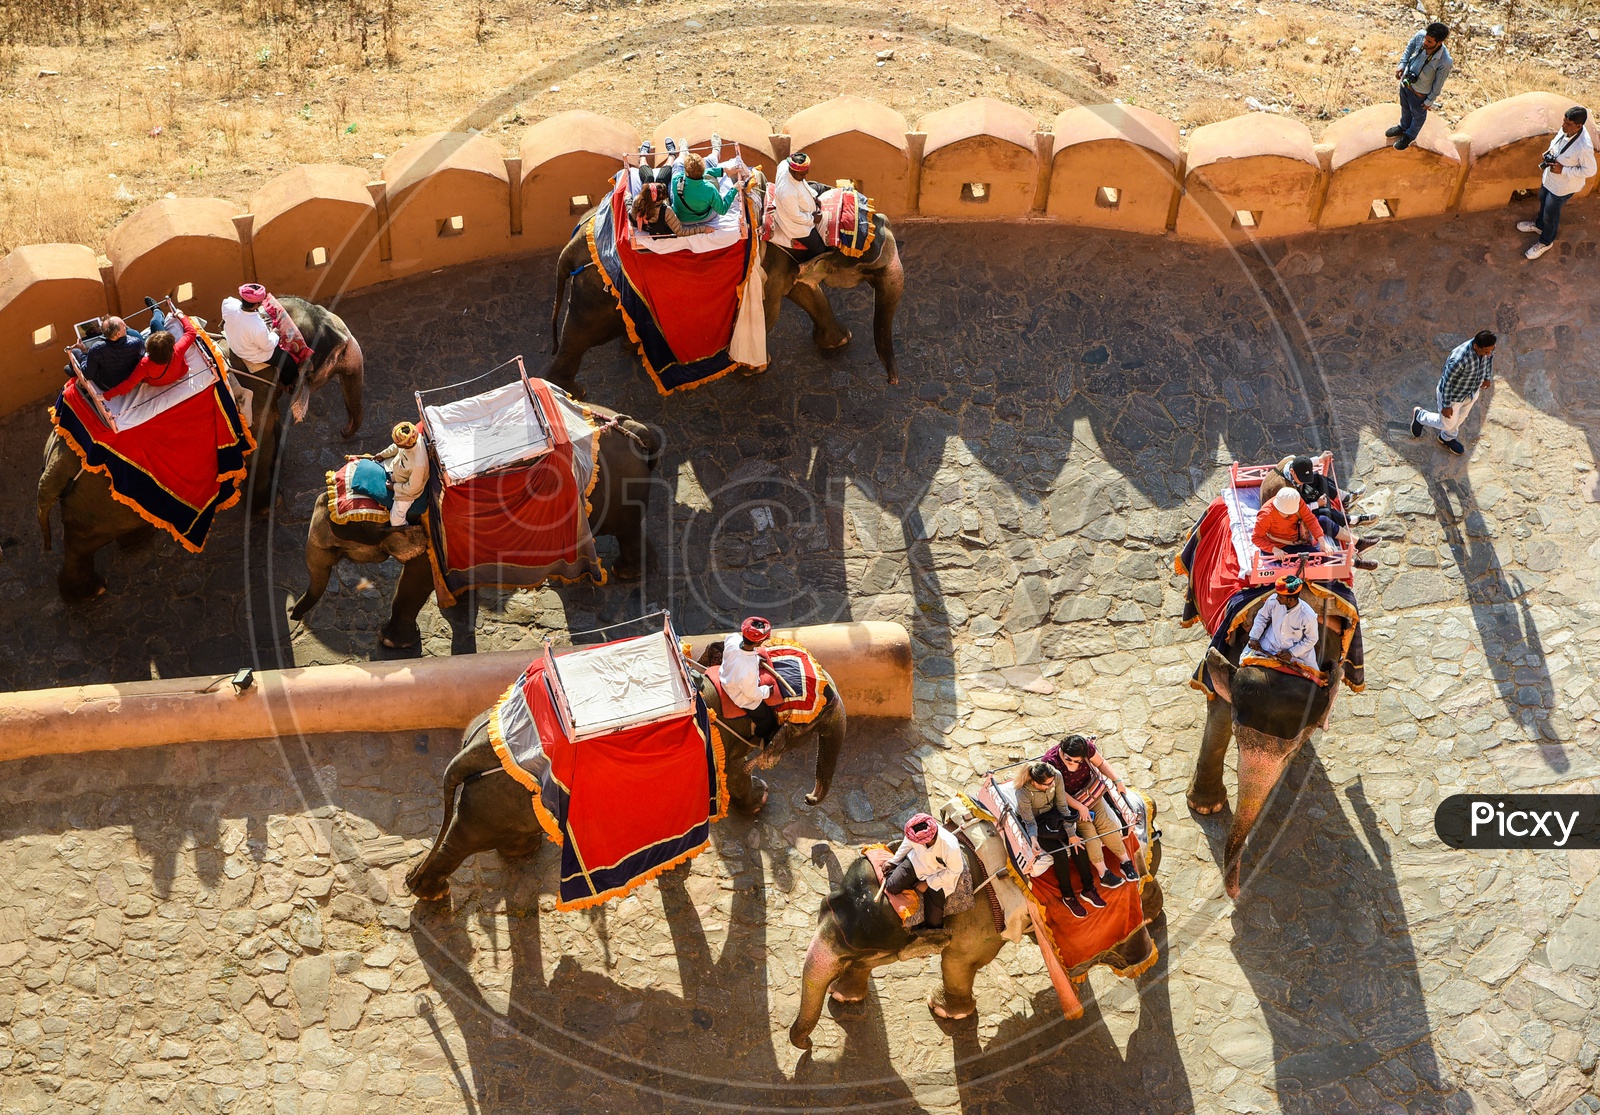 Tourists riding atop Elephants in Amer Fort